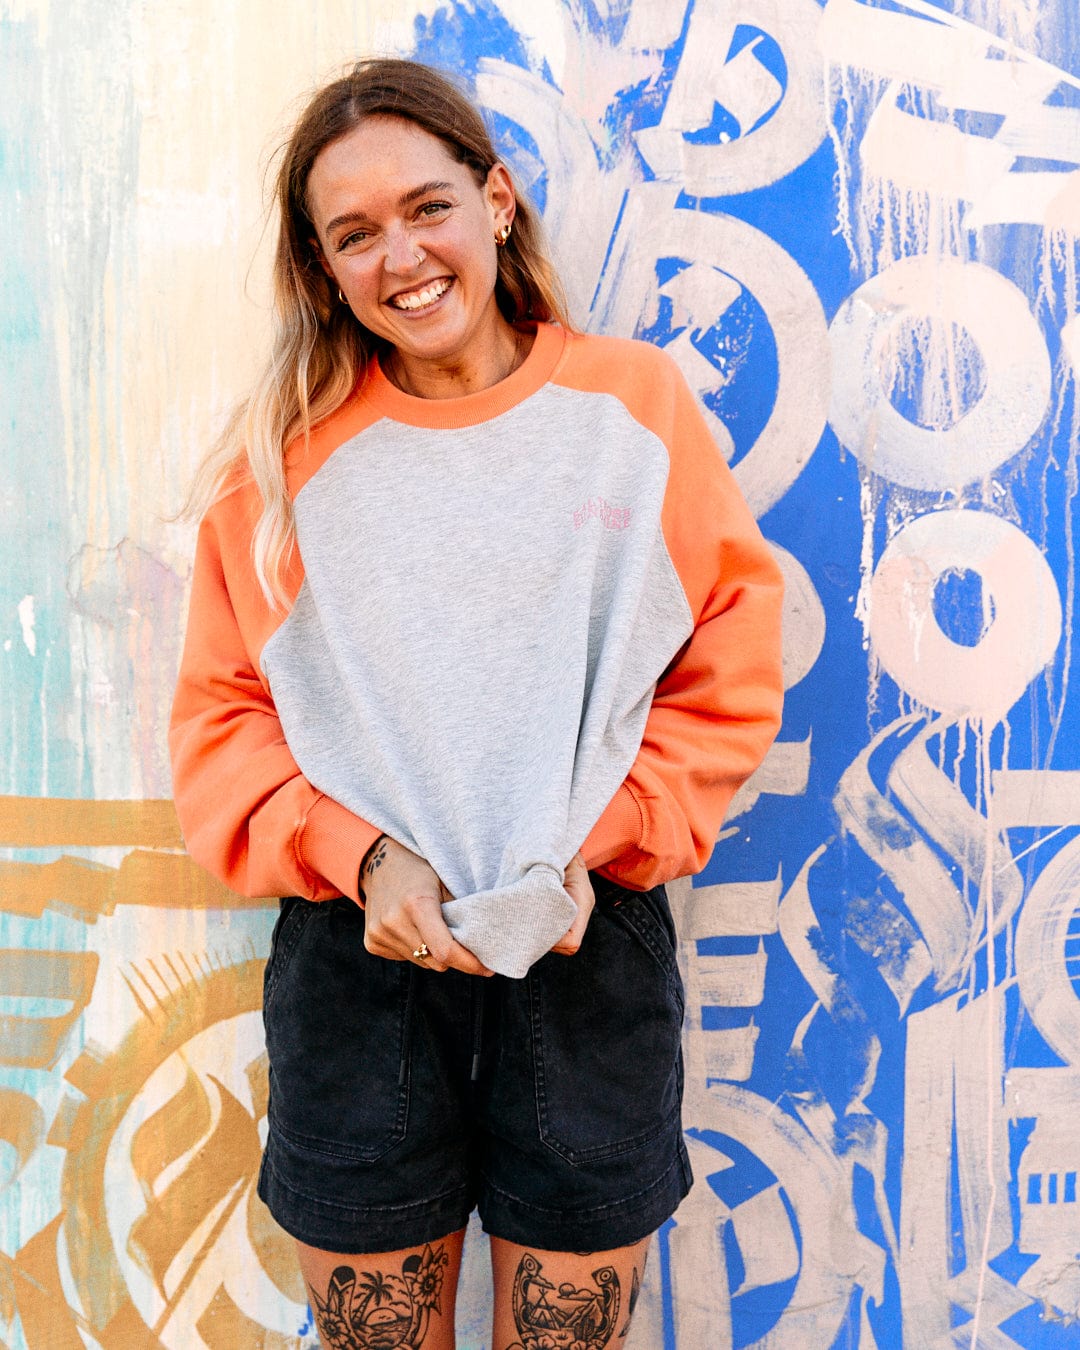 A cheerful young woman in a Saltrock Sunshine - Womens Raglan Sweat - Grey Marl and black shorts standing in front of a blue graffiti wall.